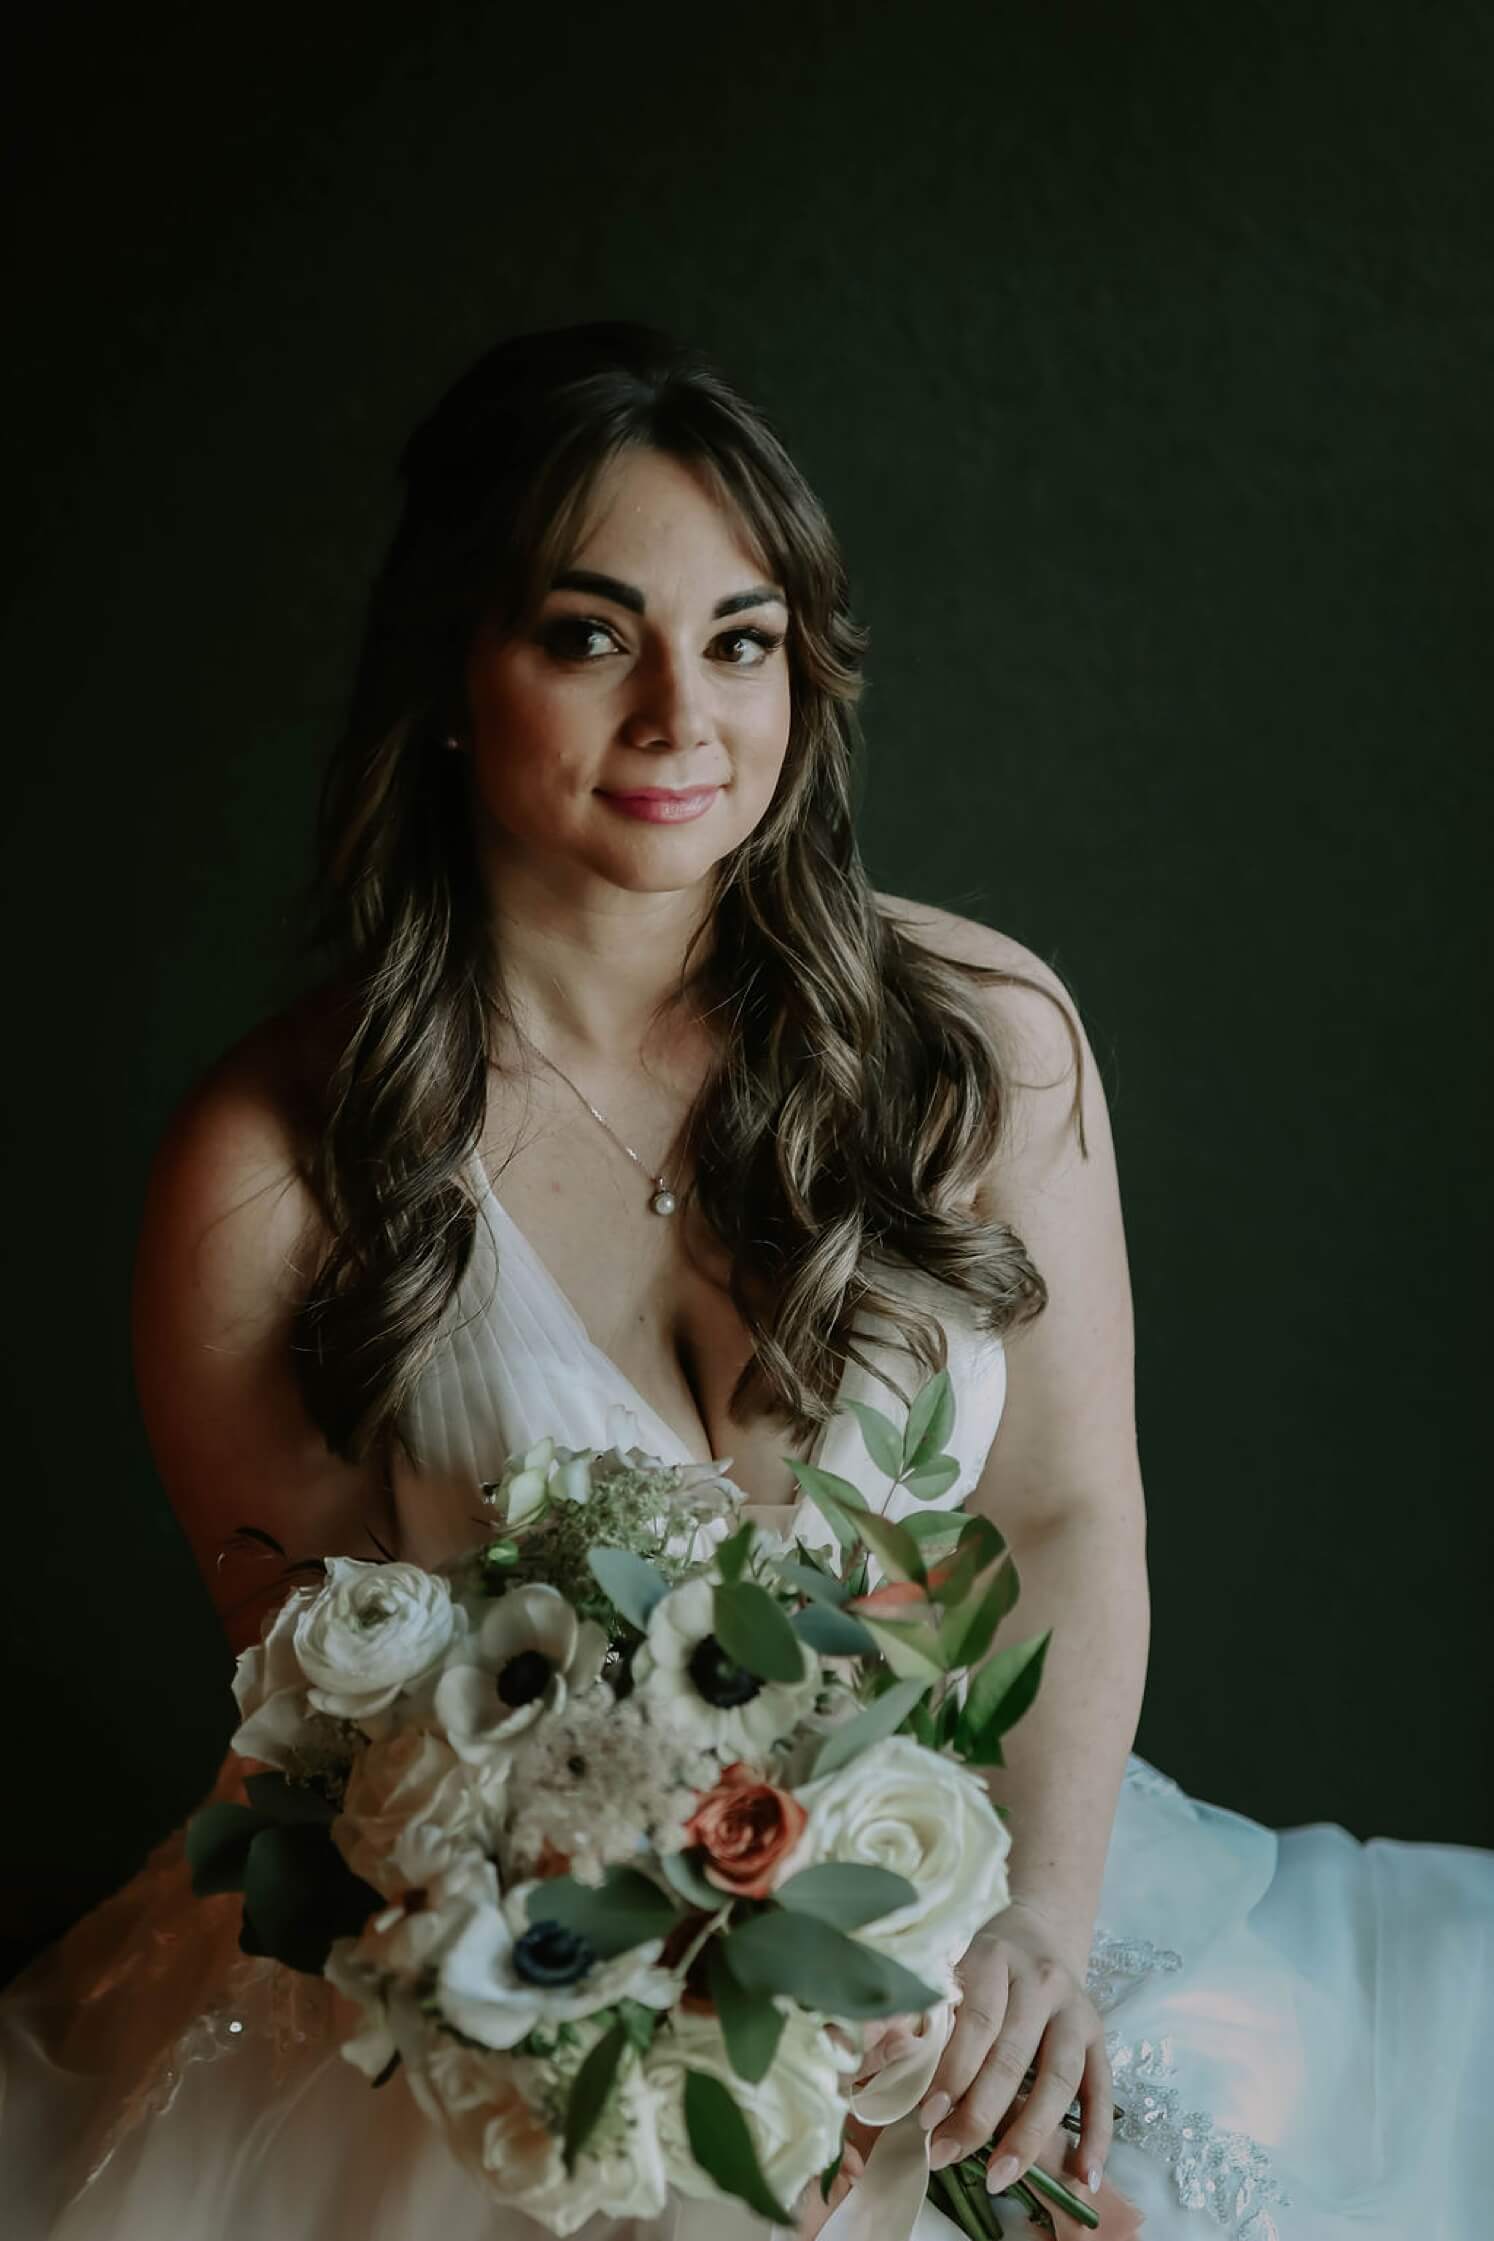 Bride wearing a v-neck wedding dress holding a white and coral wedding bouquet | McArthur Weddings and Events